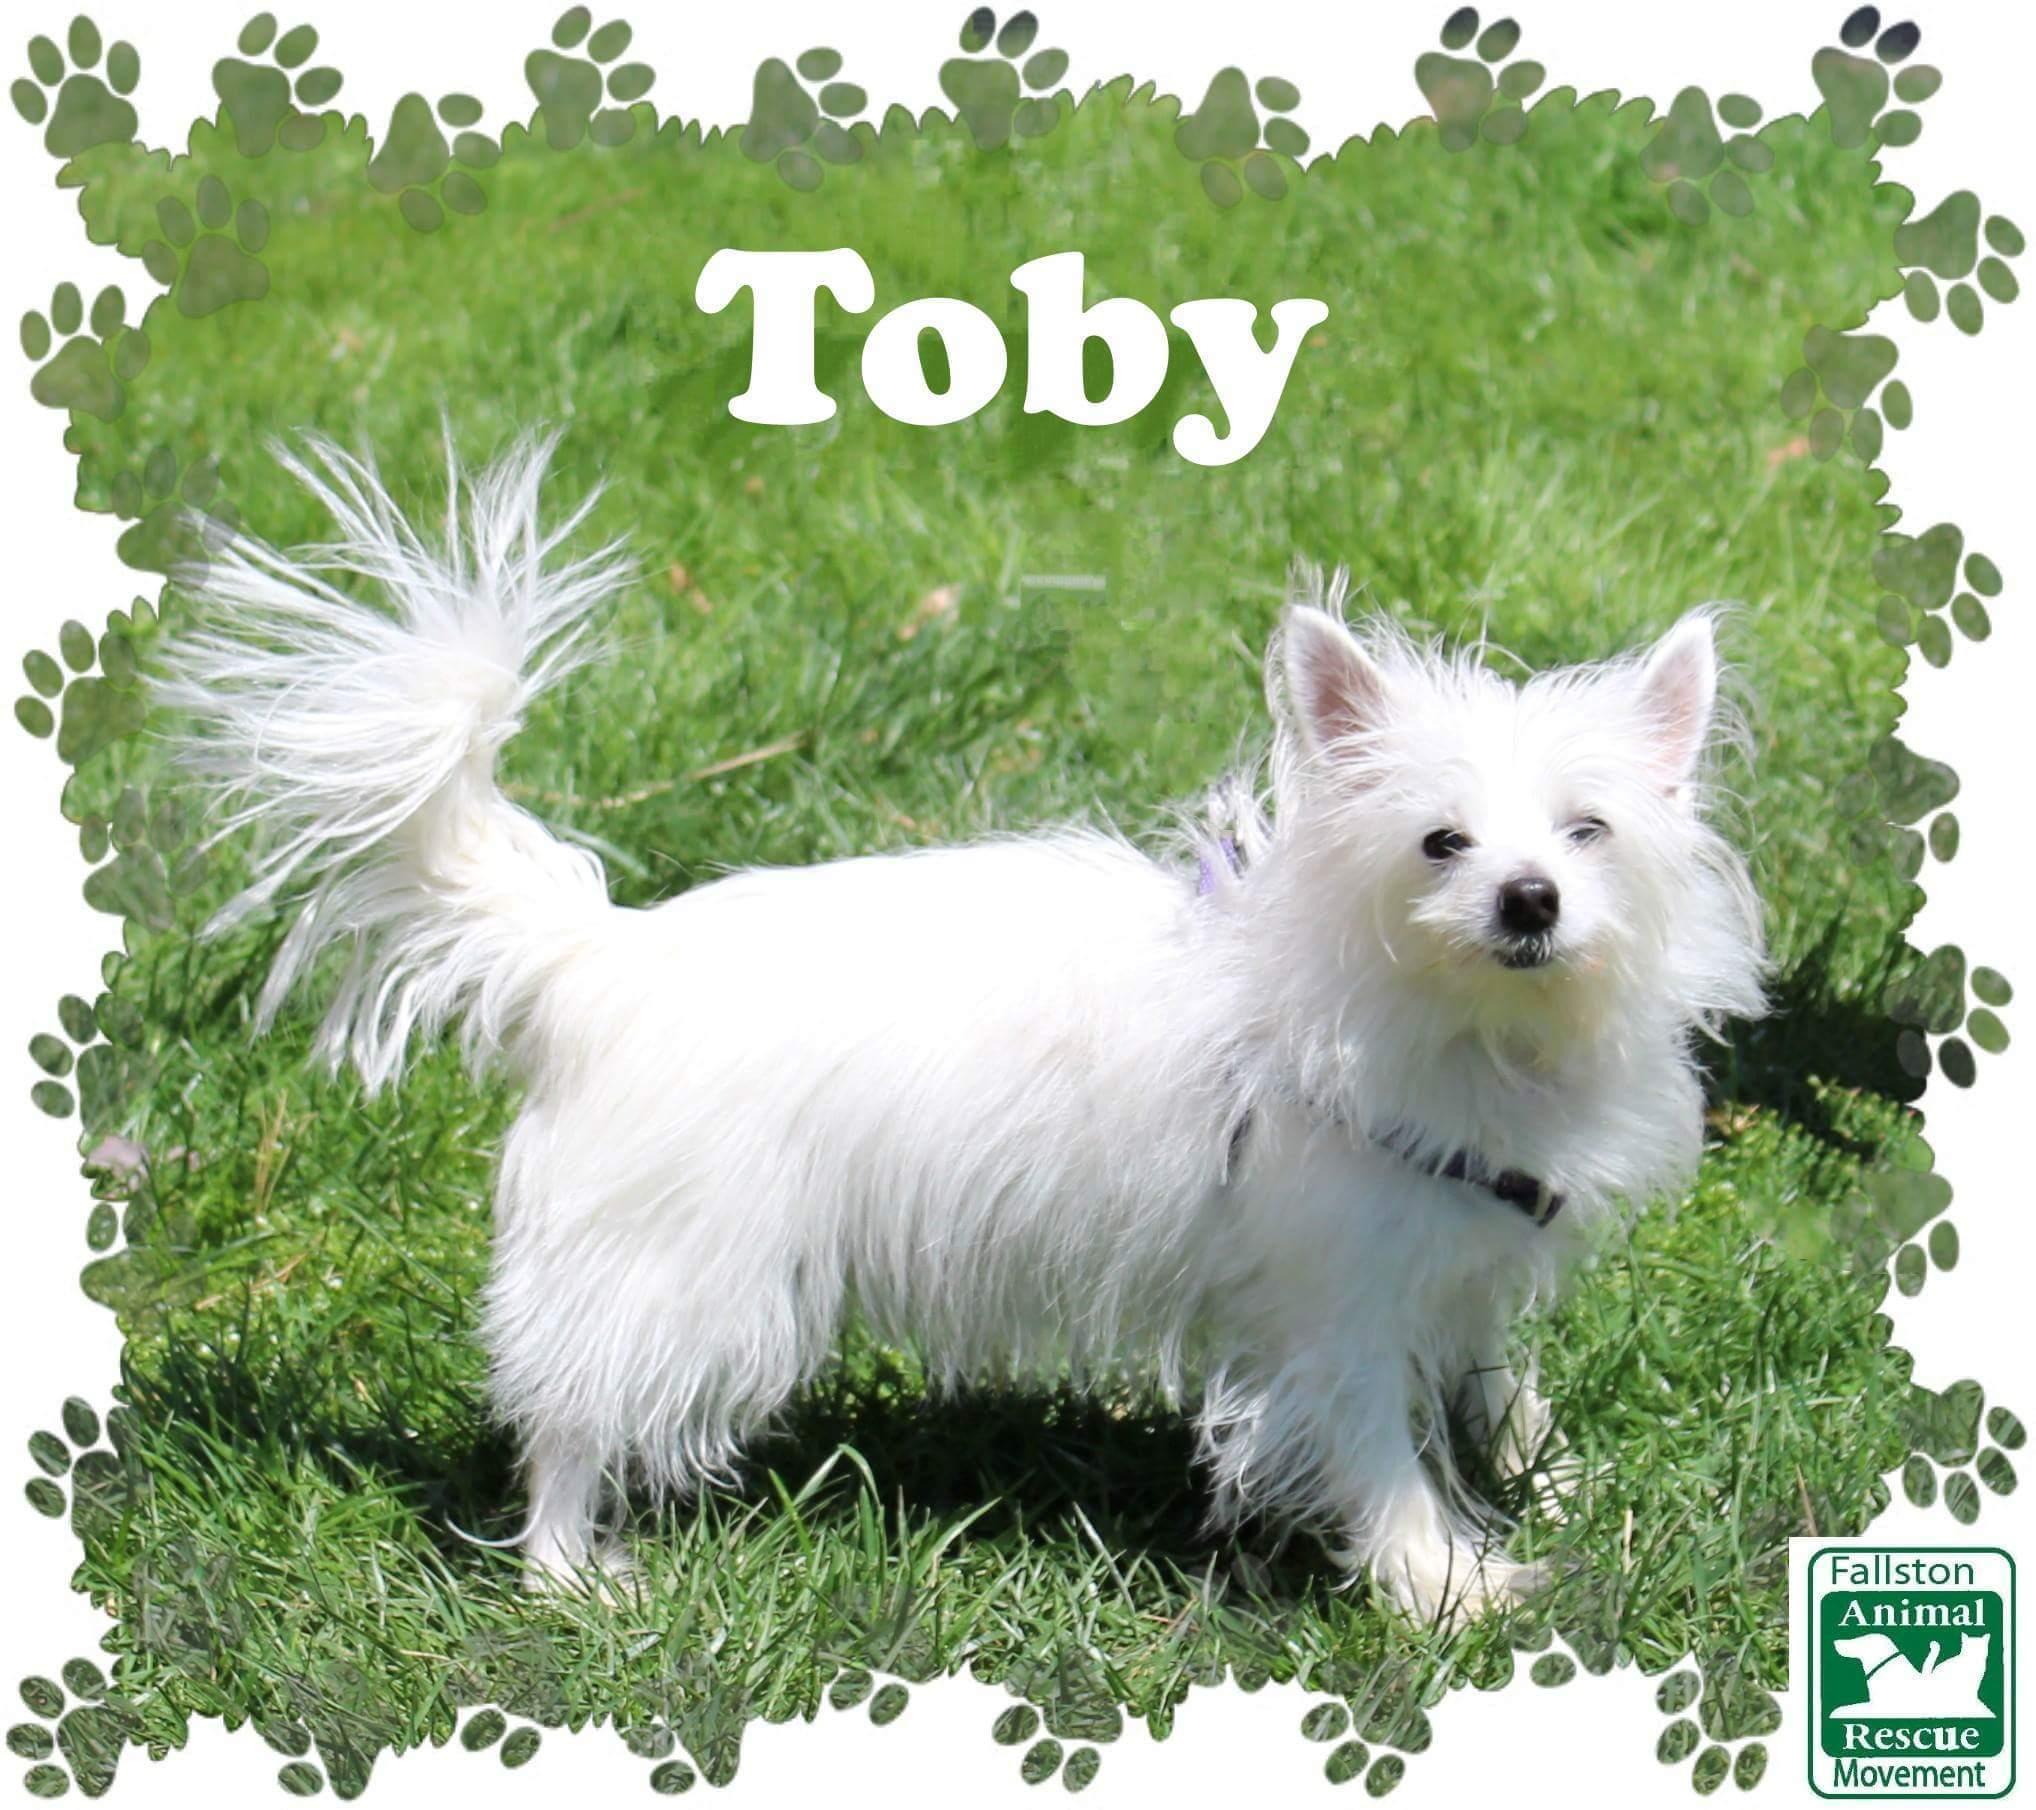 Toby detail page